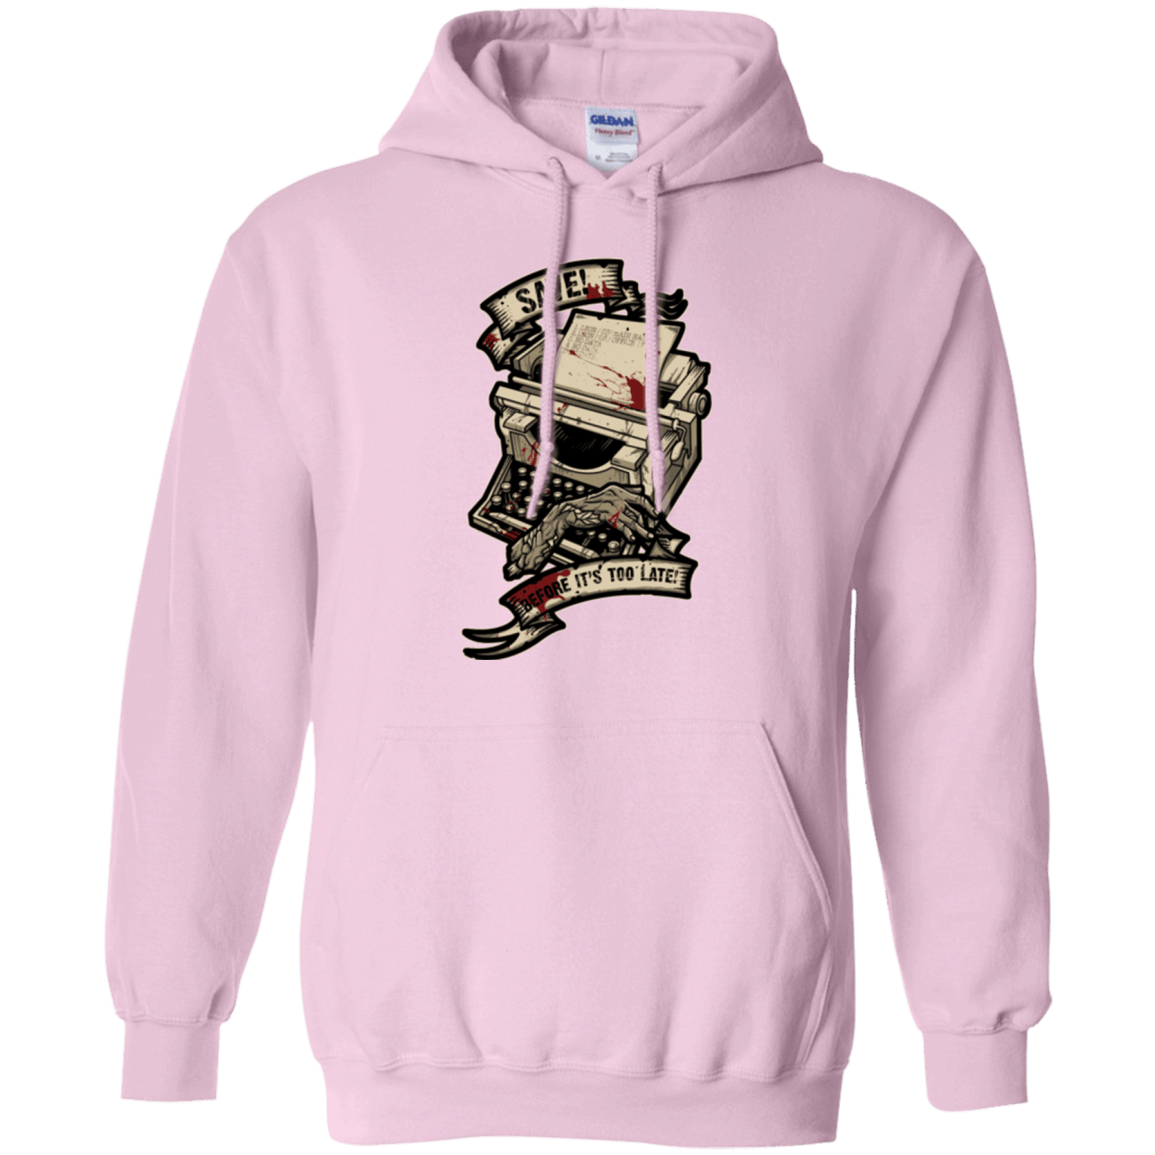 Sweatshirts Light Pink / Small EVIL SAVE POINT Pullover Hoodie